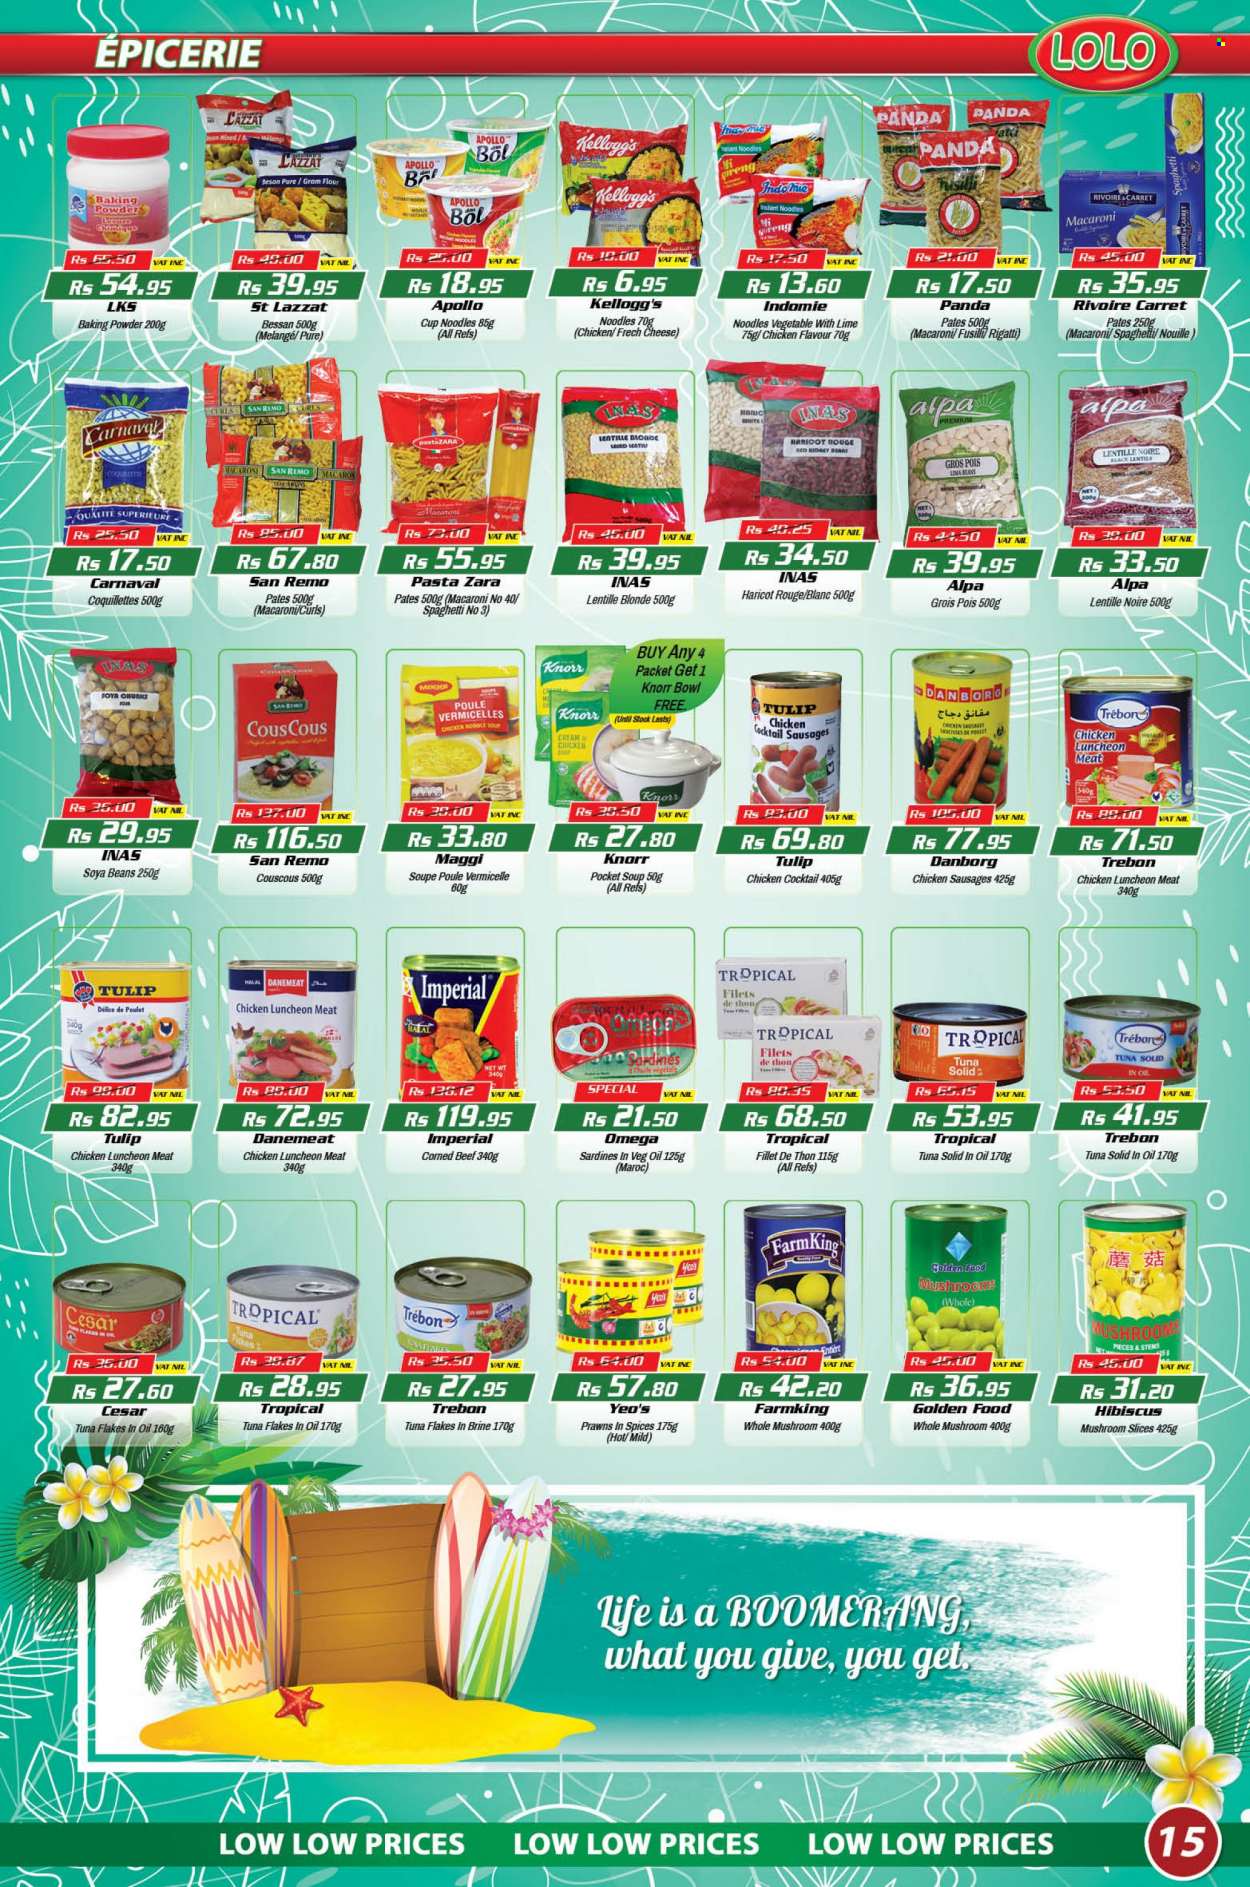 thumbnail - LOLO Hyper Catalogue - 26.08.2022 - 15.09.2022 - Sales products - mushrooms, beans, sardines, tuna, prawns, spaghetti, macaroni, soup, pasta, instant noodles, noodles cup, noodles, sausage, lunch meat, corned beef, cheese, lima beans, Kellogg's, baking powder, flour, gram flour, Maggi, lentils, beef meat, bowl, panda, couscous, Knorr. Page 15.